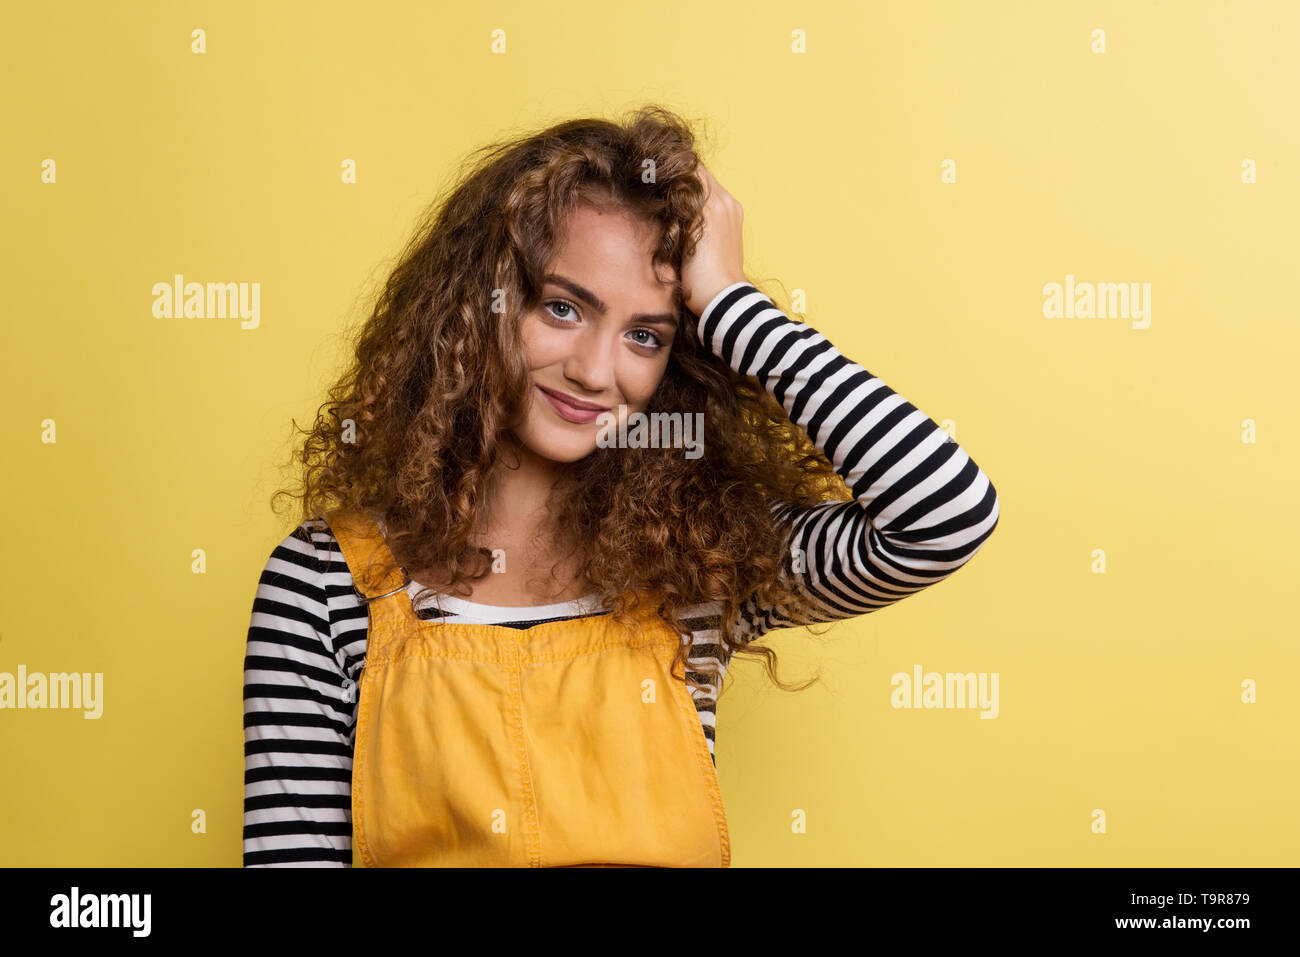 Portrait of a young woman in a studio on a yellow background. Stock Photo